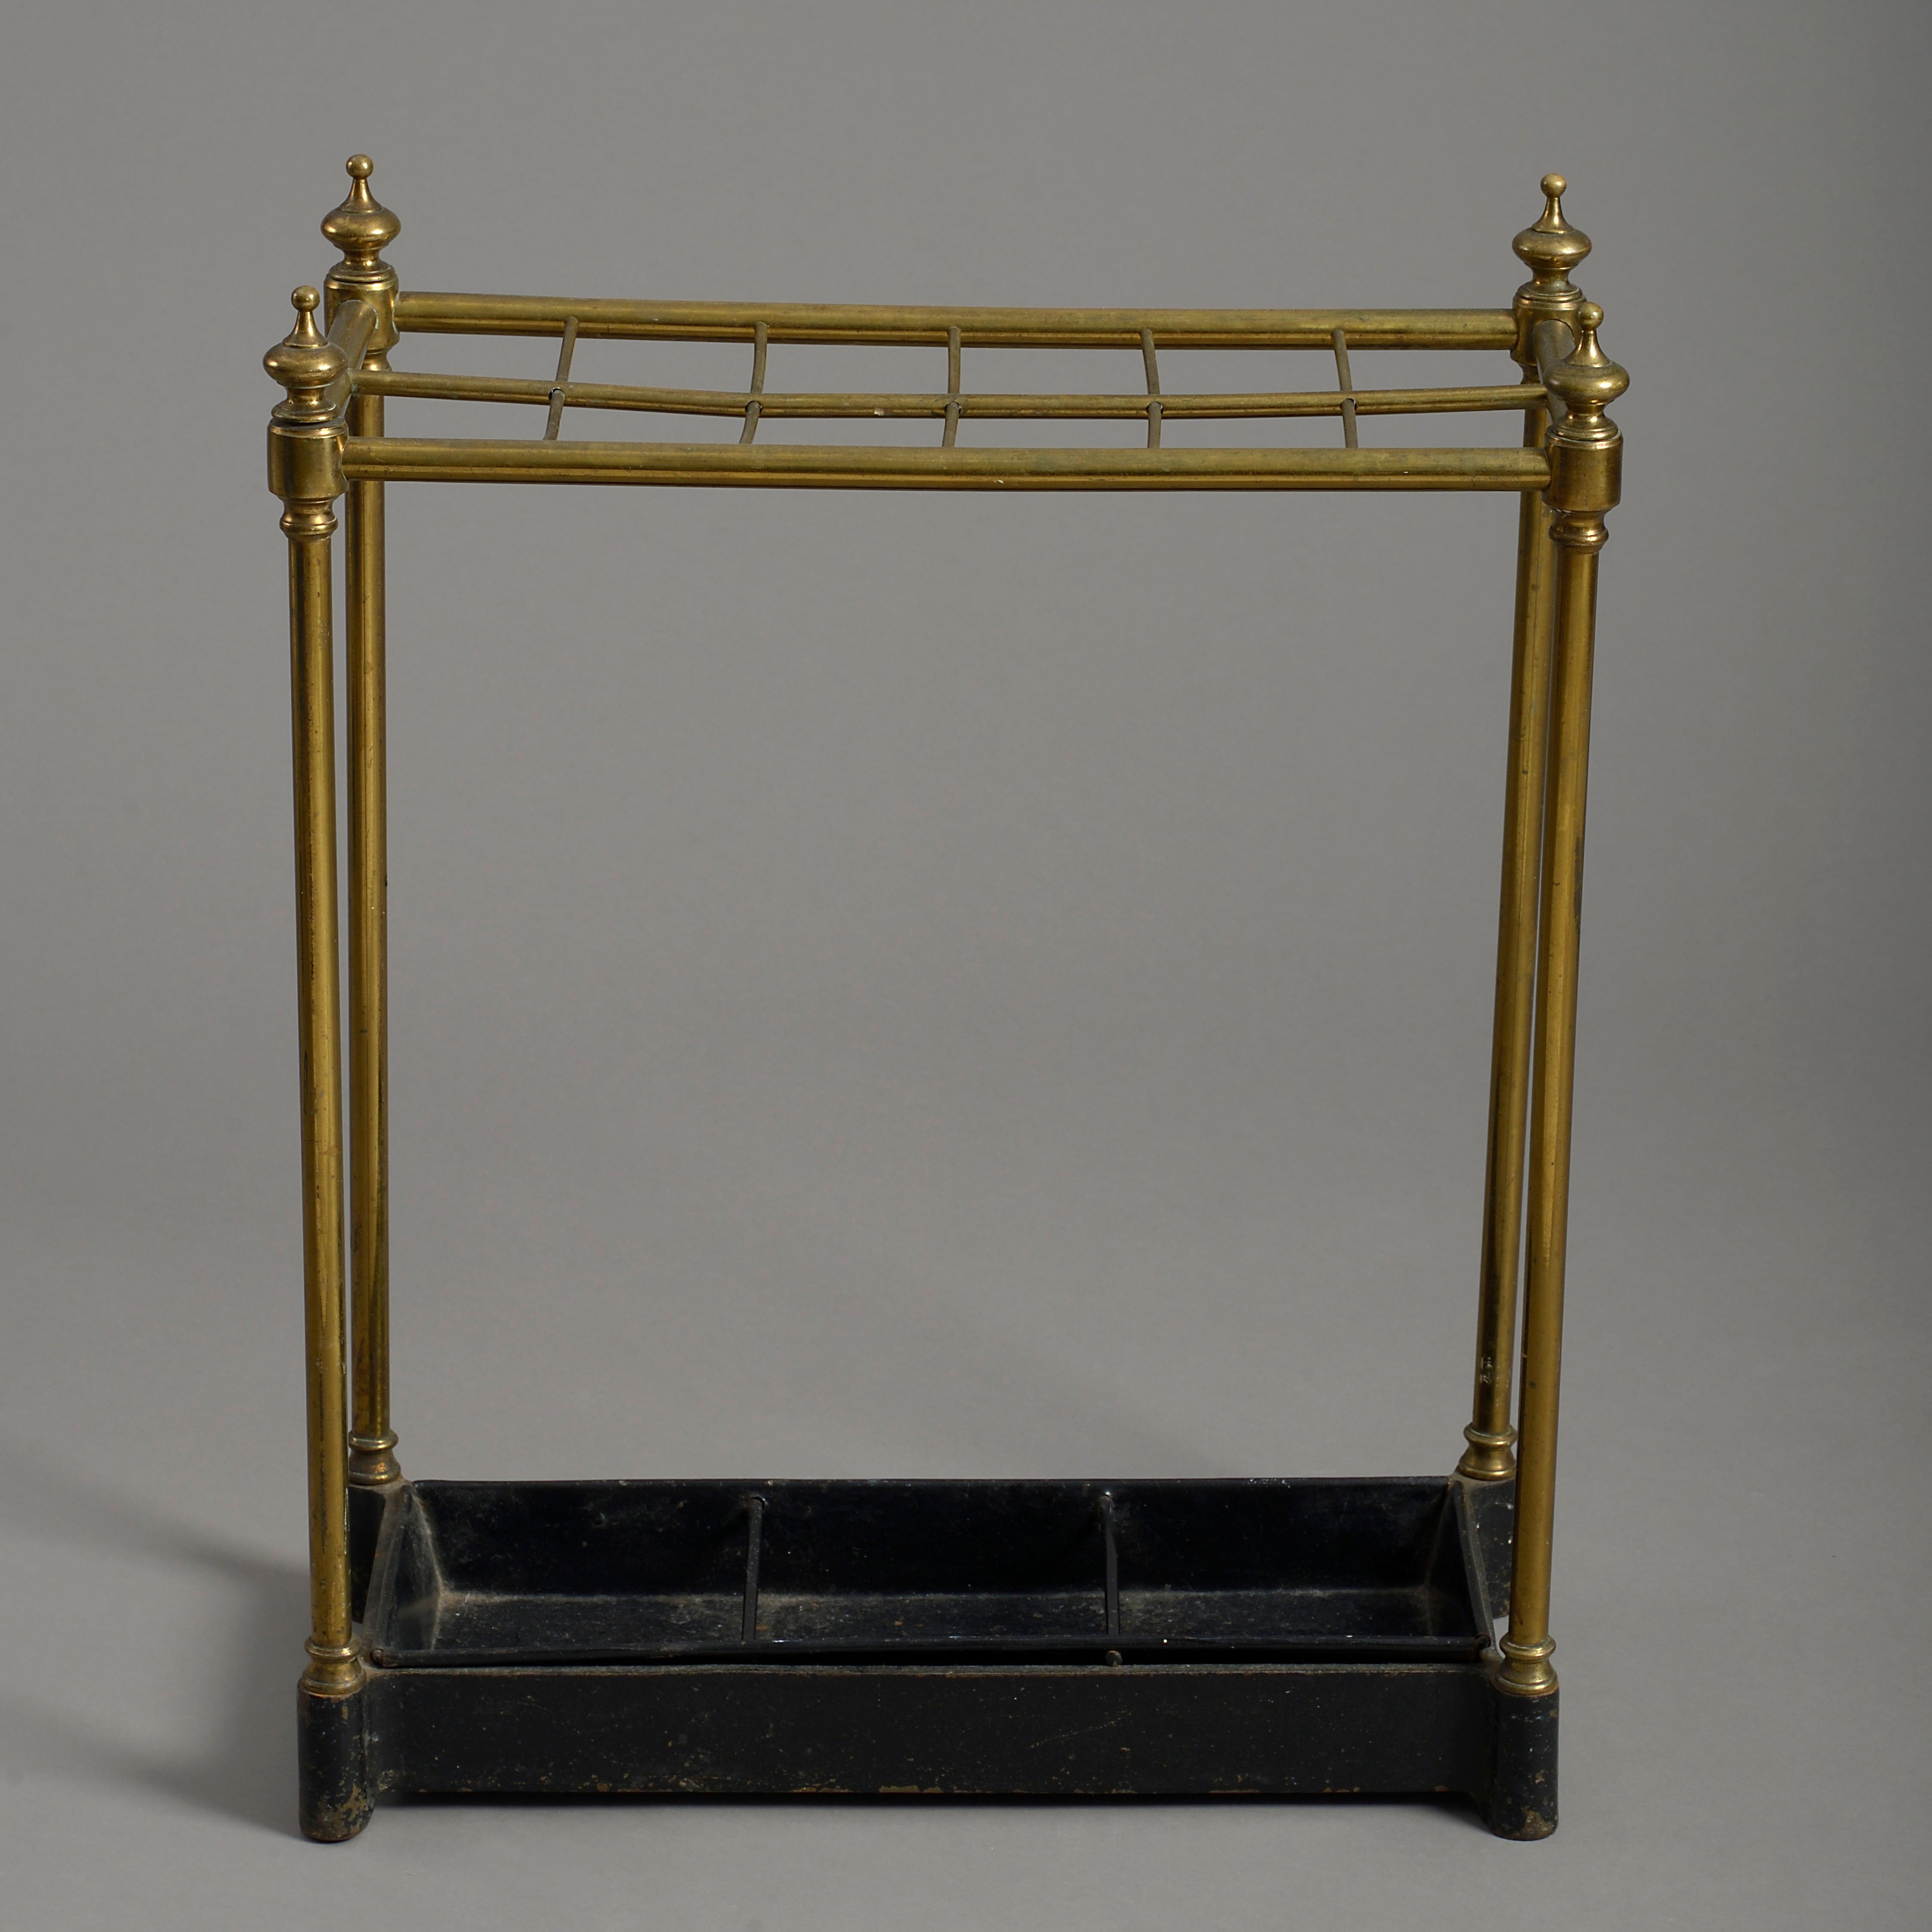 A late 19th century Victorian period stick and umbrella stand, the rectangular brass frame with turned finials, twelve divisions, all set upon a cast iron base with the original tin drip pan.